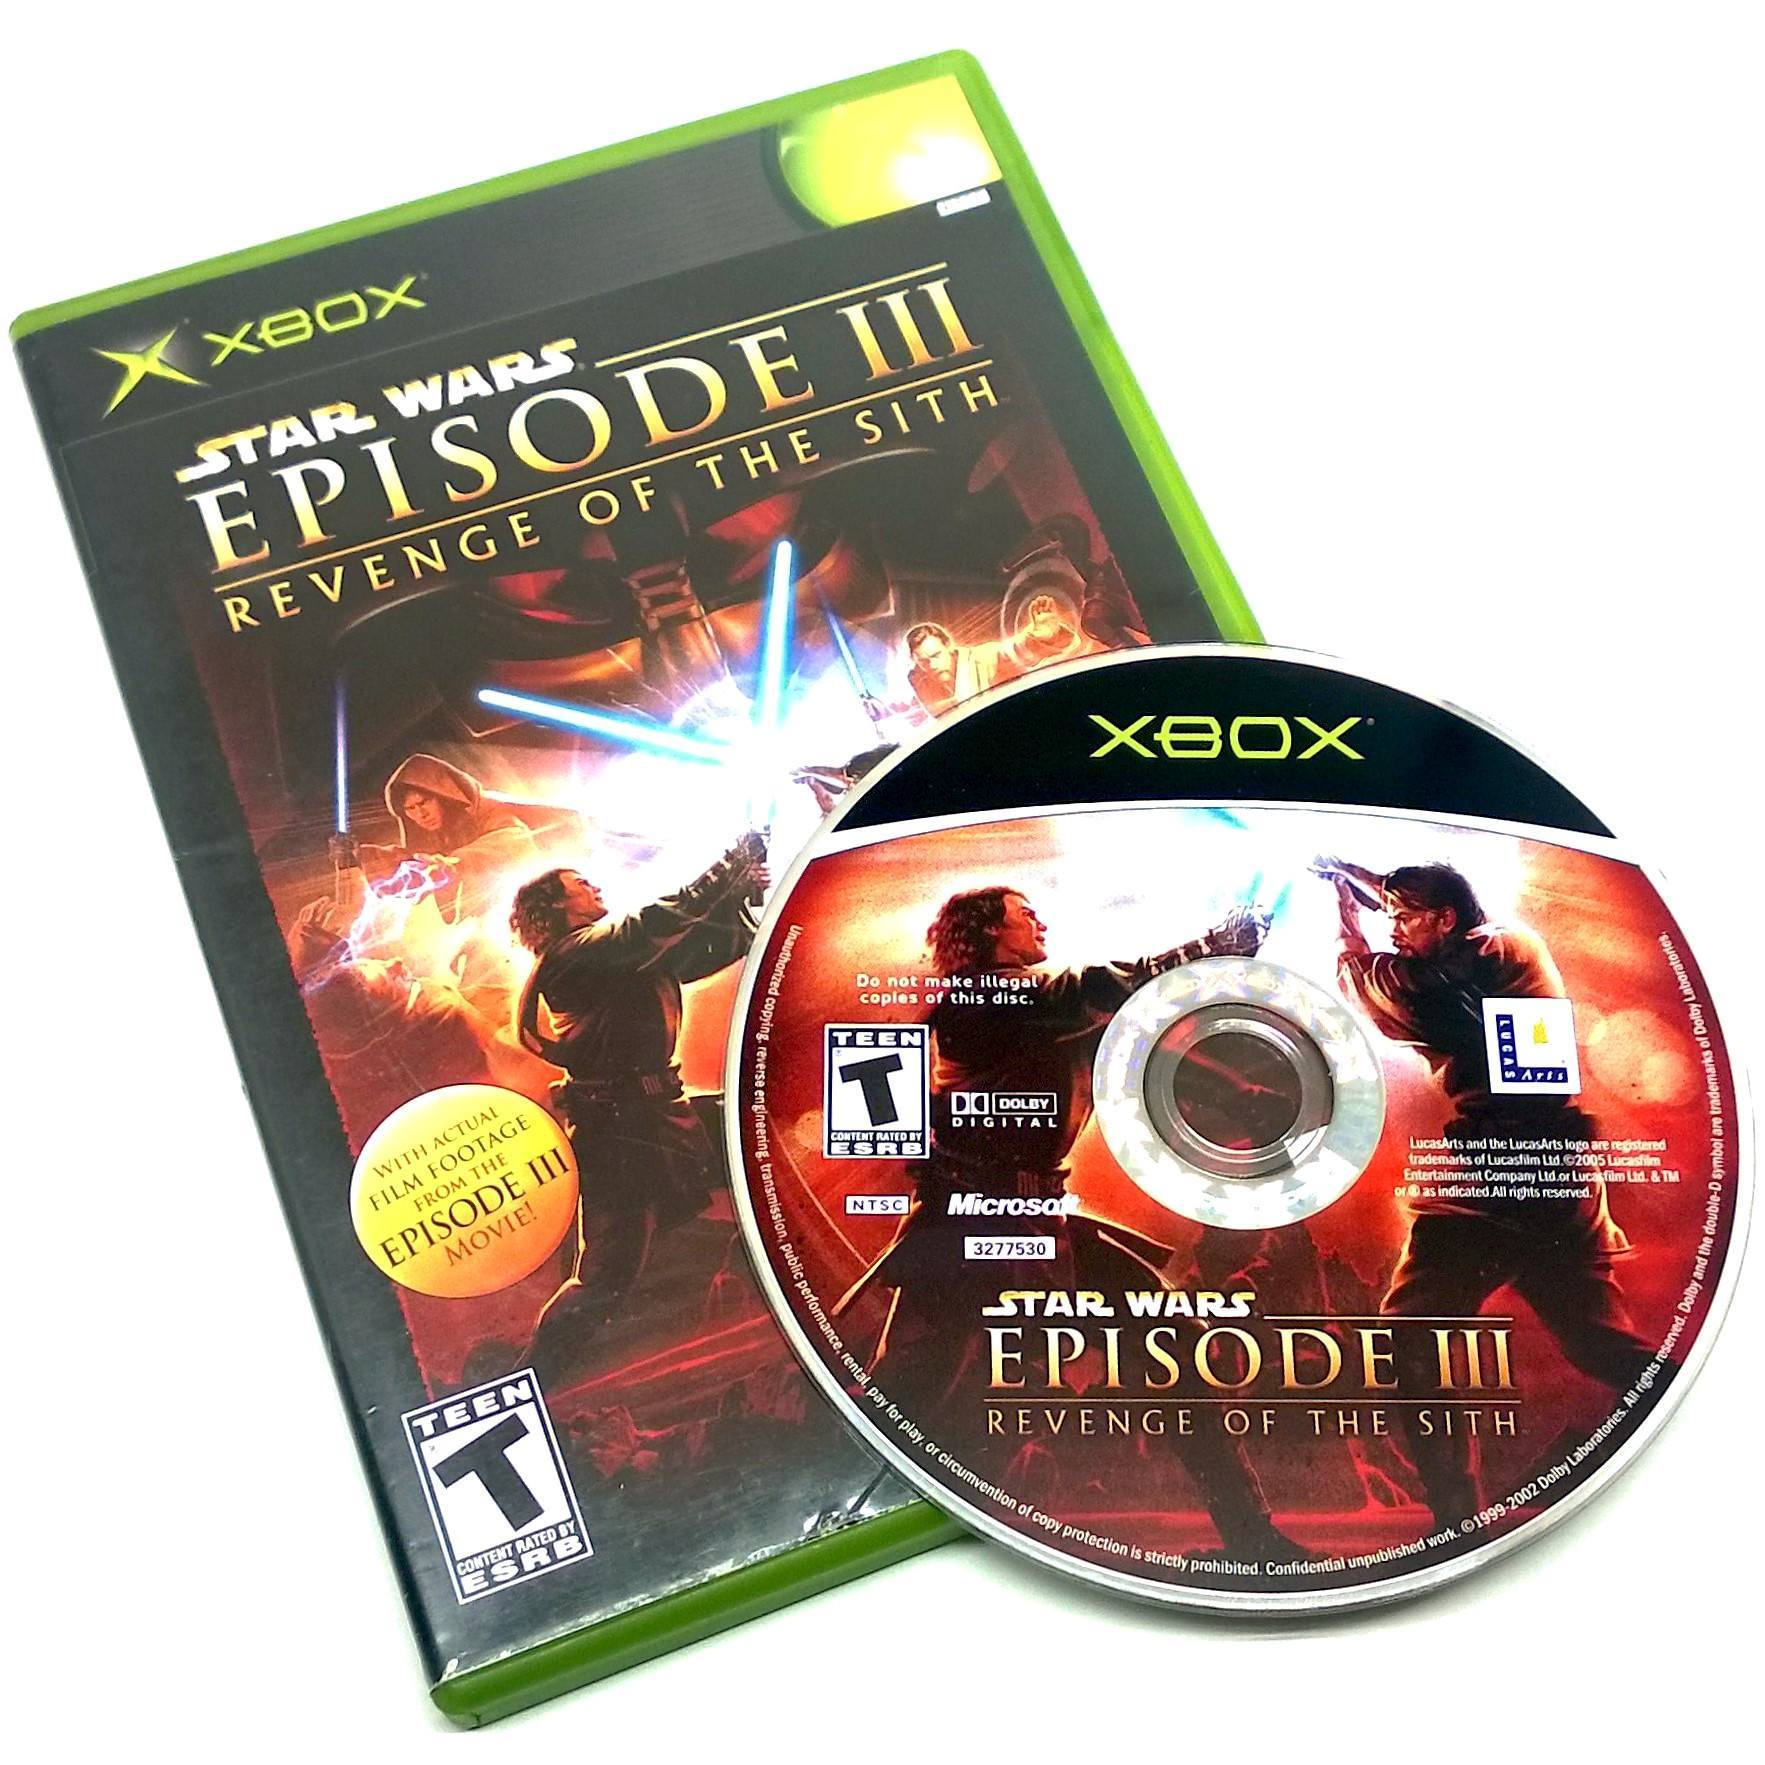 Star Wars Episode III: Revenge of the Sith for Xbox